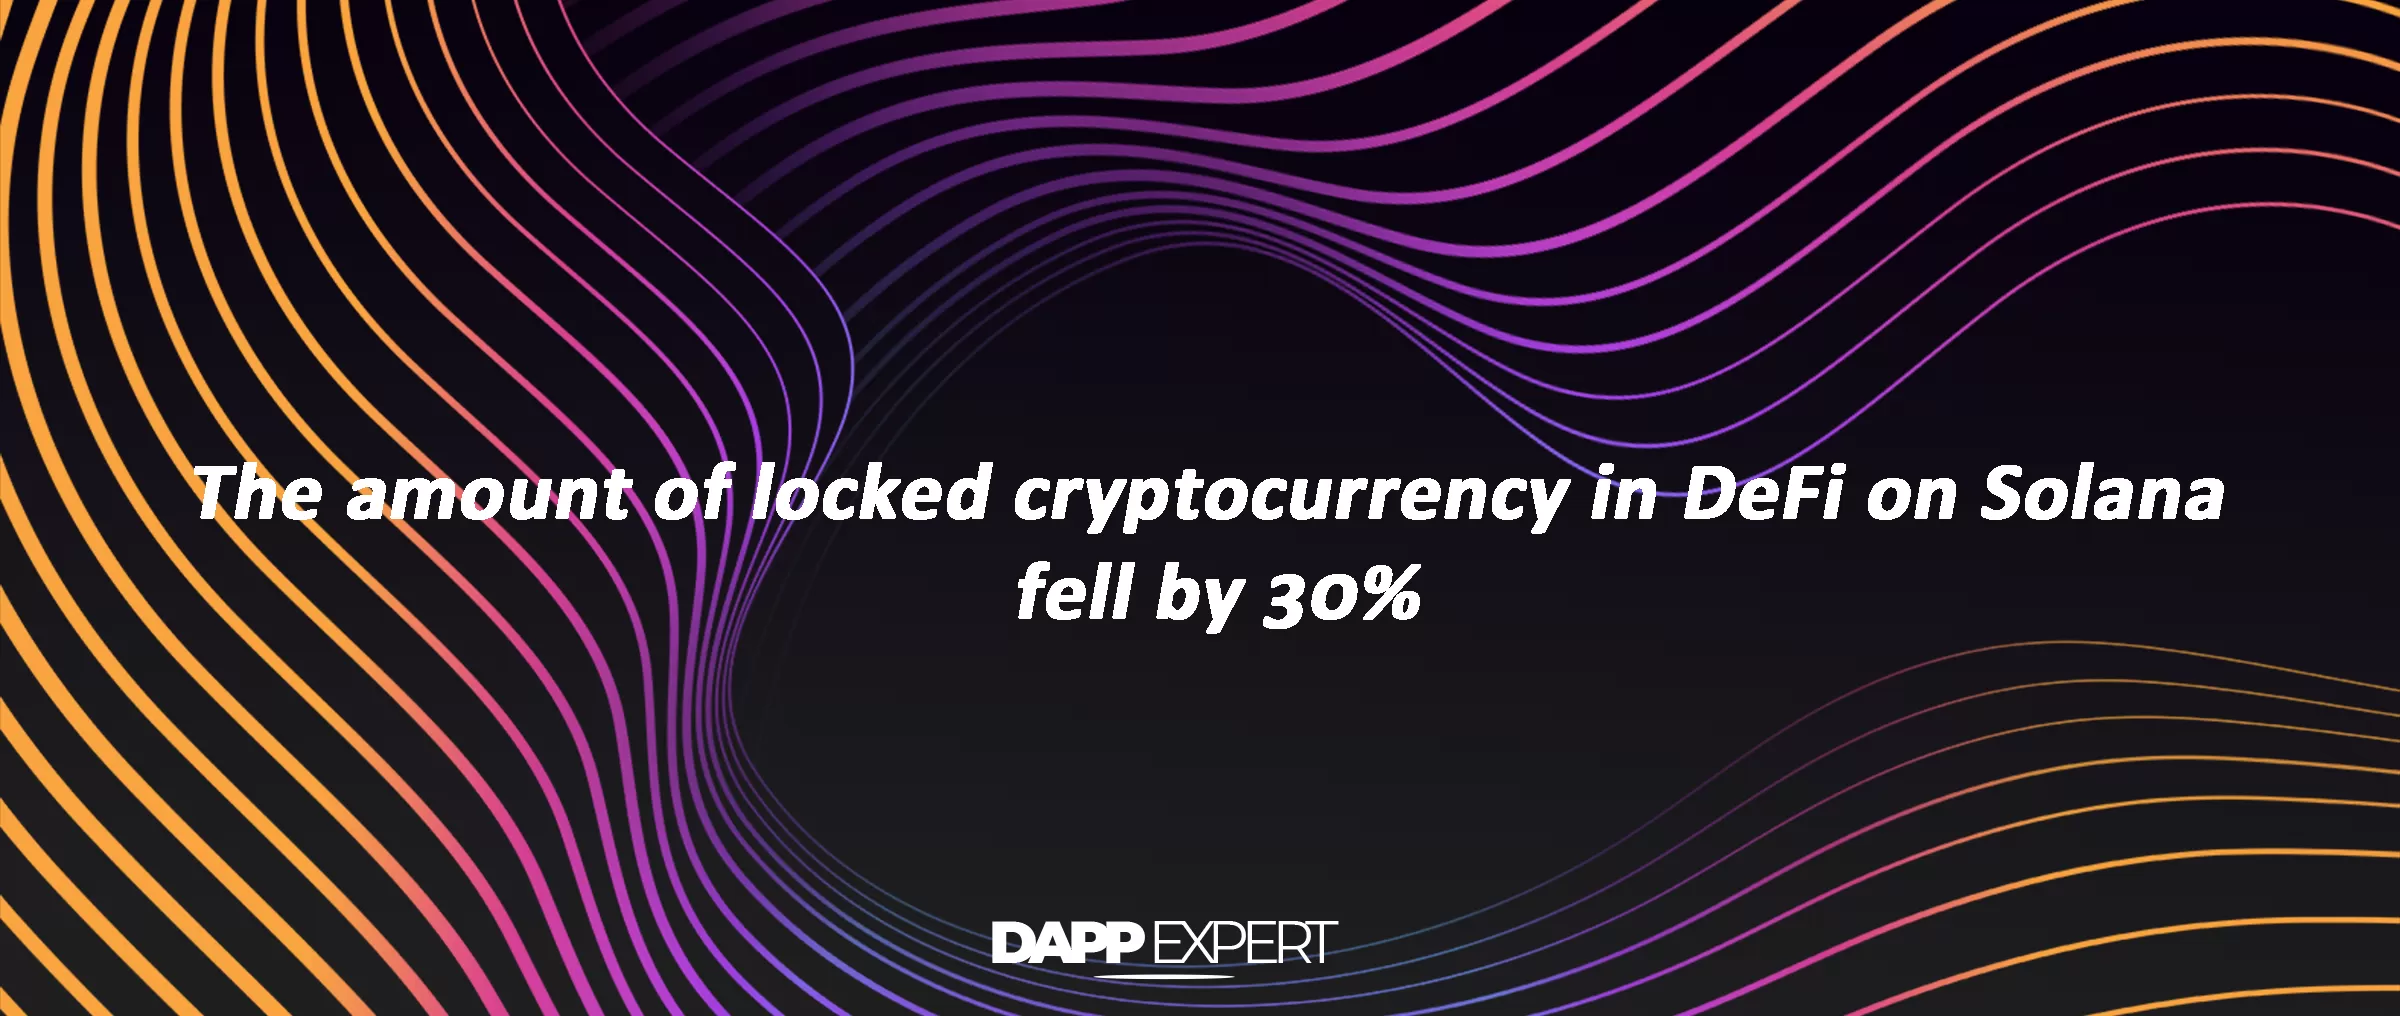 The amount of locked cryptocurrency in DeFi on Solana fell by 30%